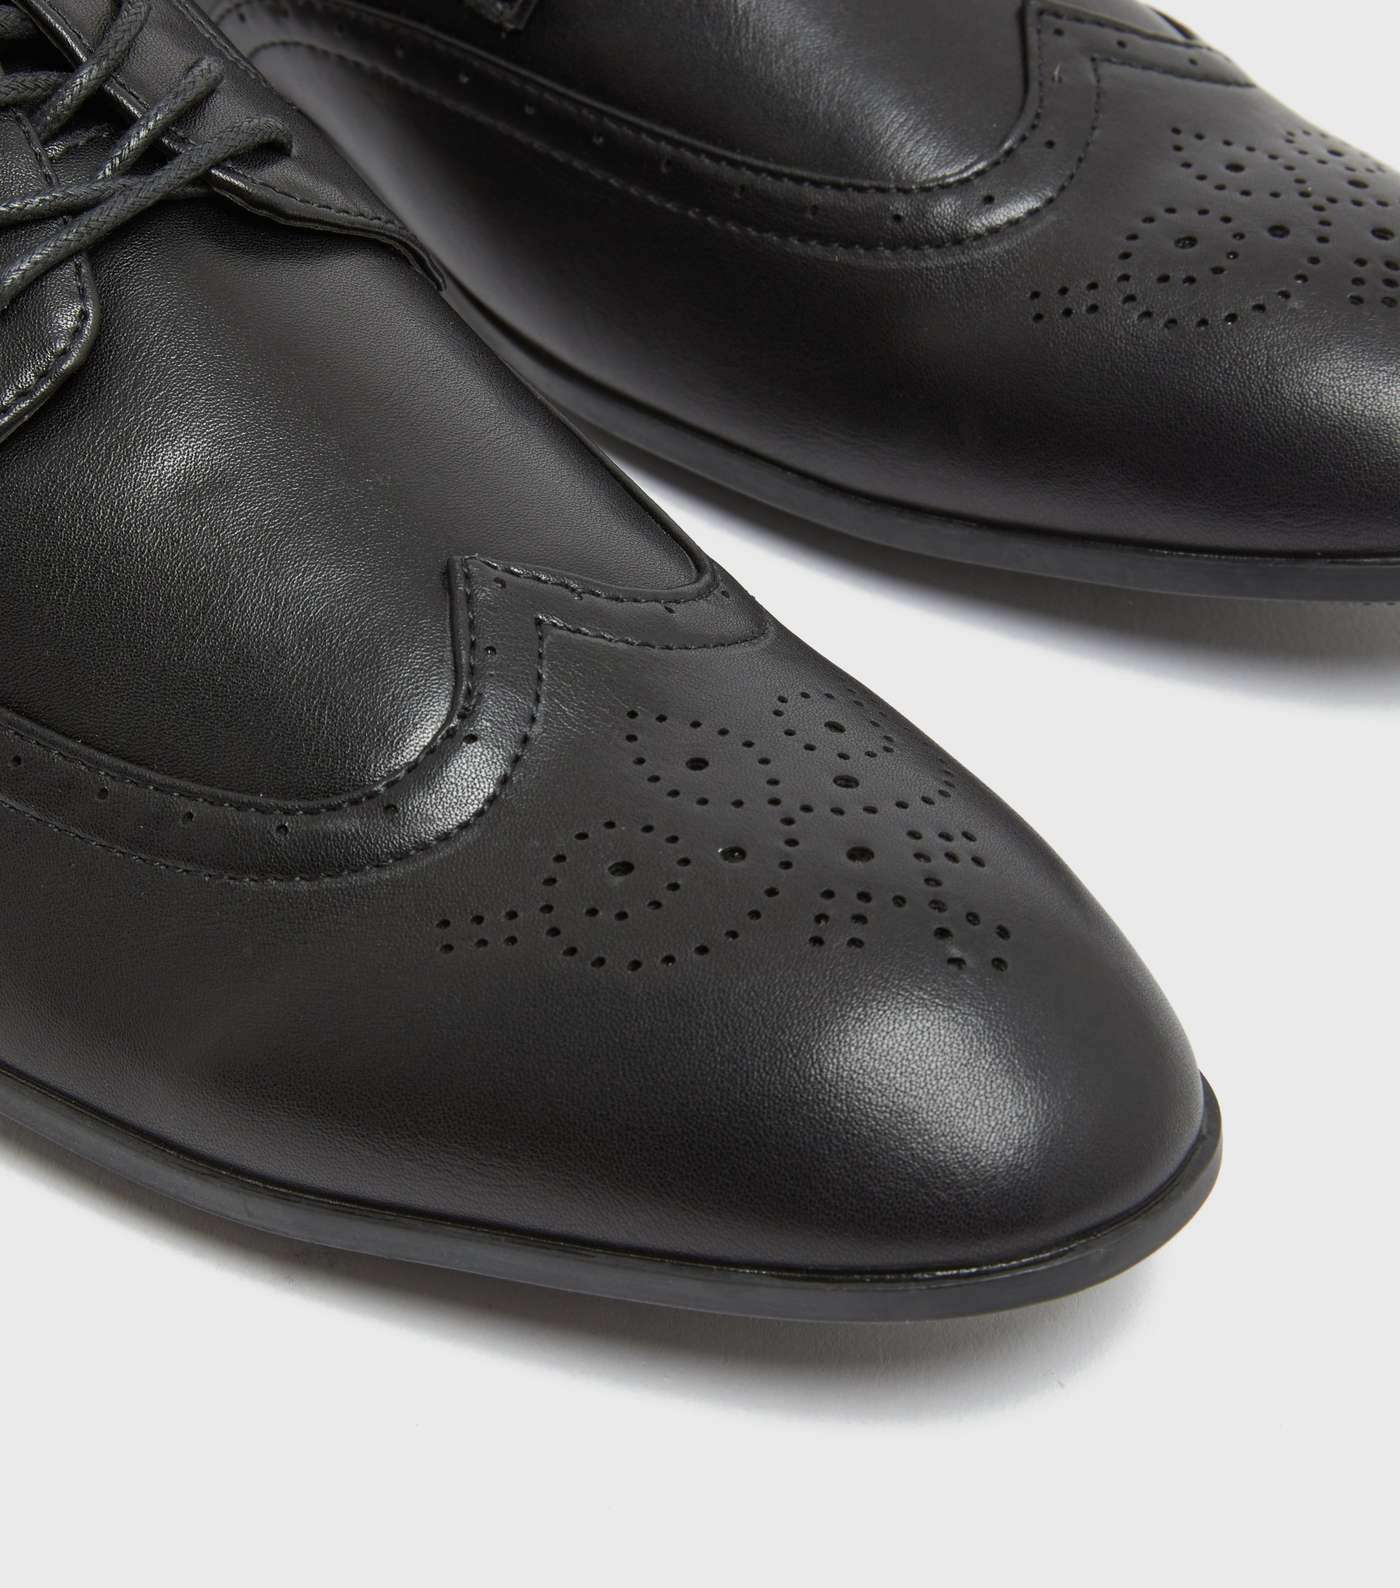 Black Leather-Look Lace Up Brogues Image 4